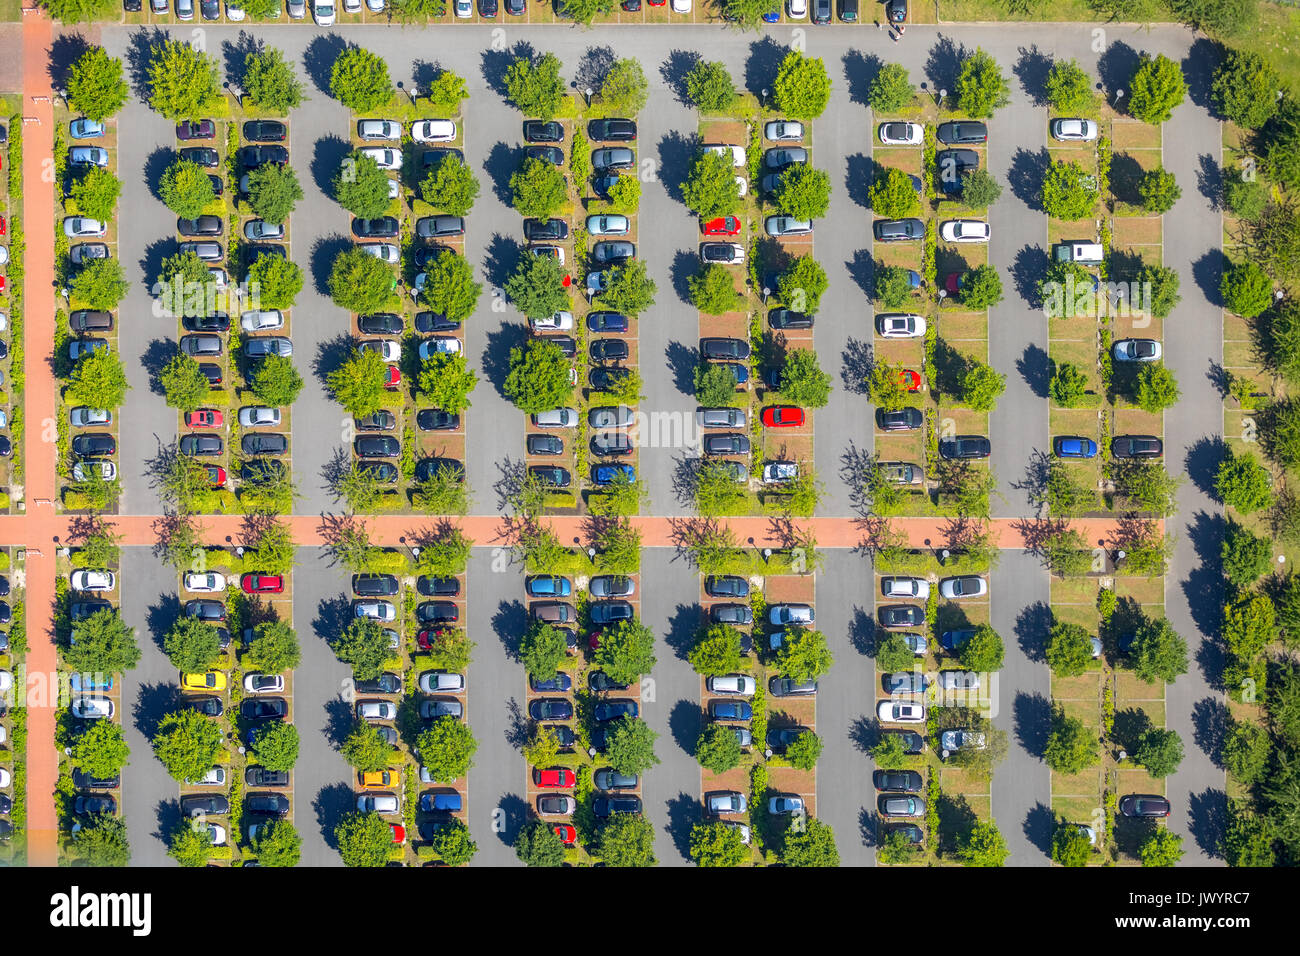 Parking OLG Hamm, Hamm Court, cars under deciduous trees, deciduous trees, colorful cars, pattern, green trees, parked cars, Hamm, Ruhr, Nordrhein-Wes Stock Photo